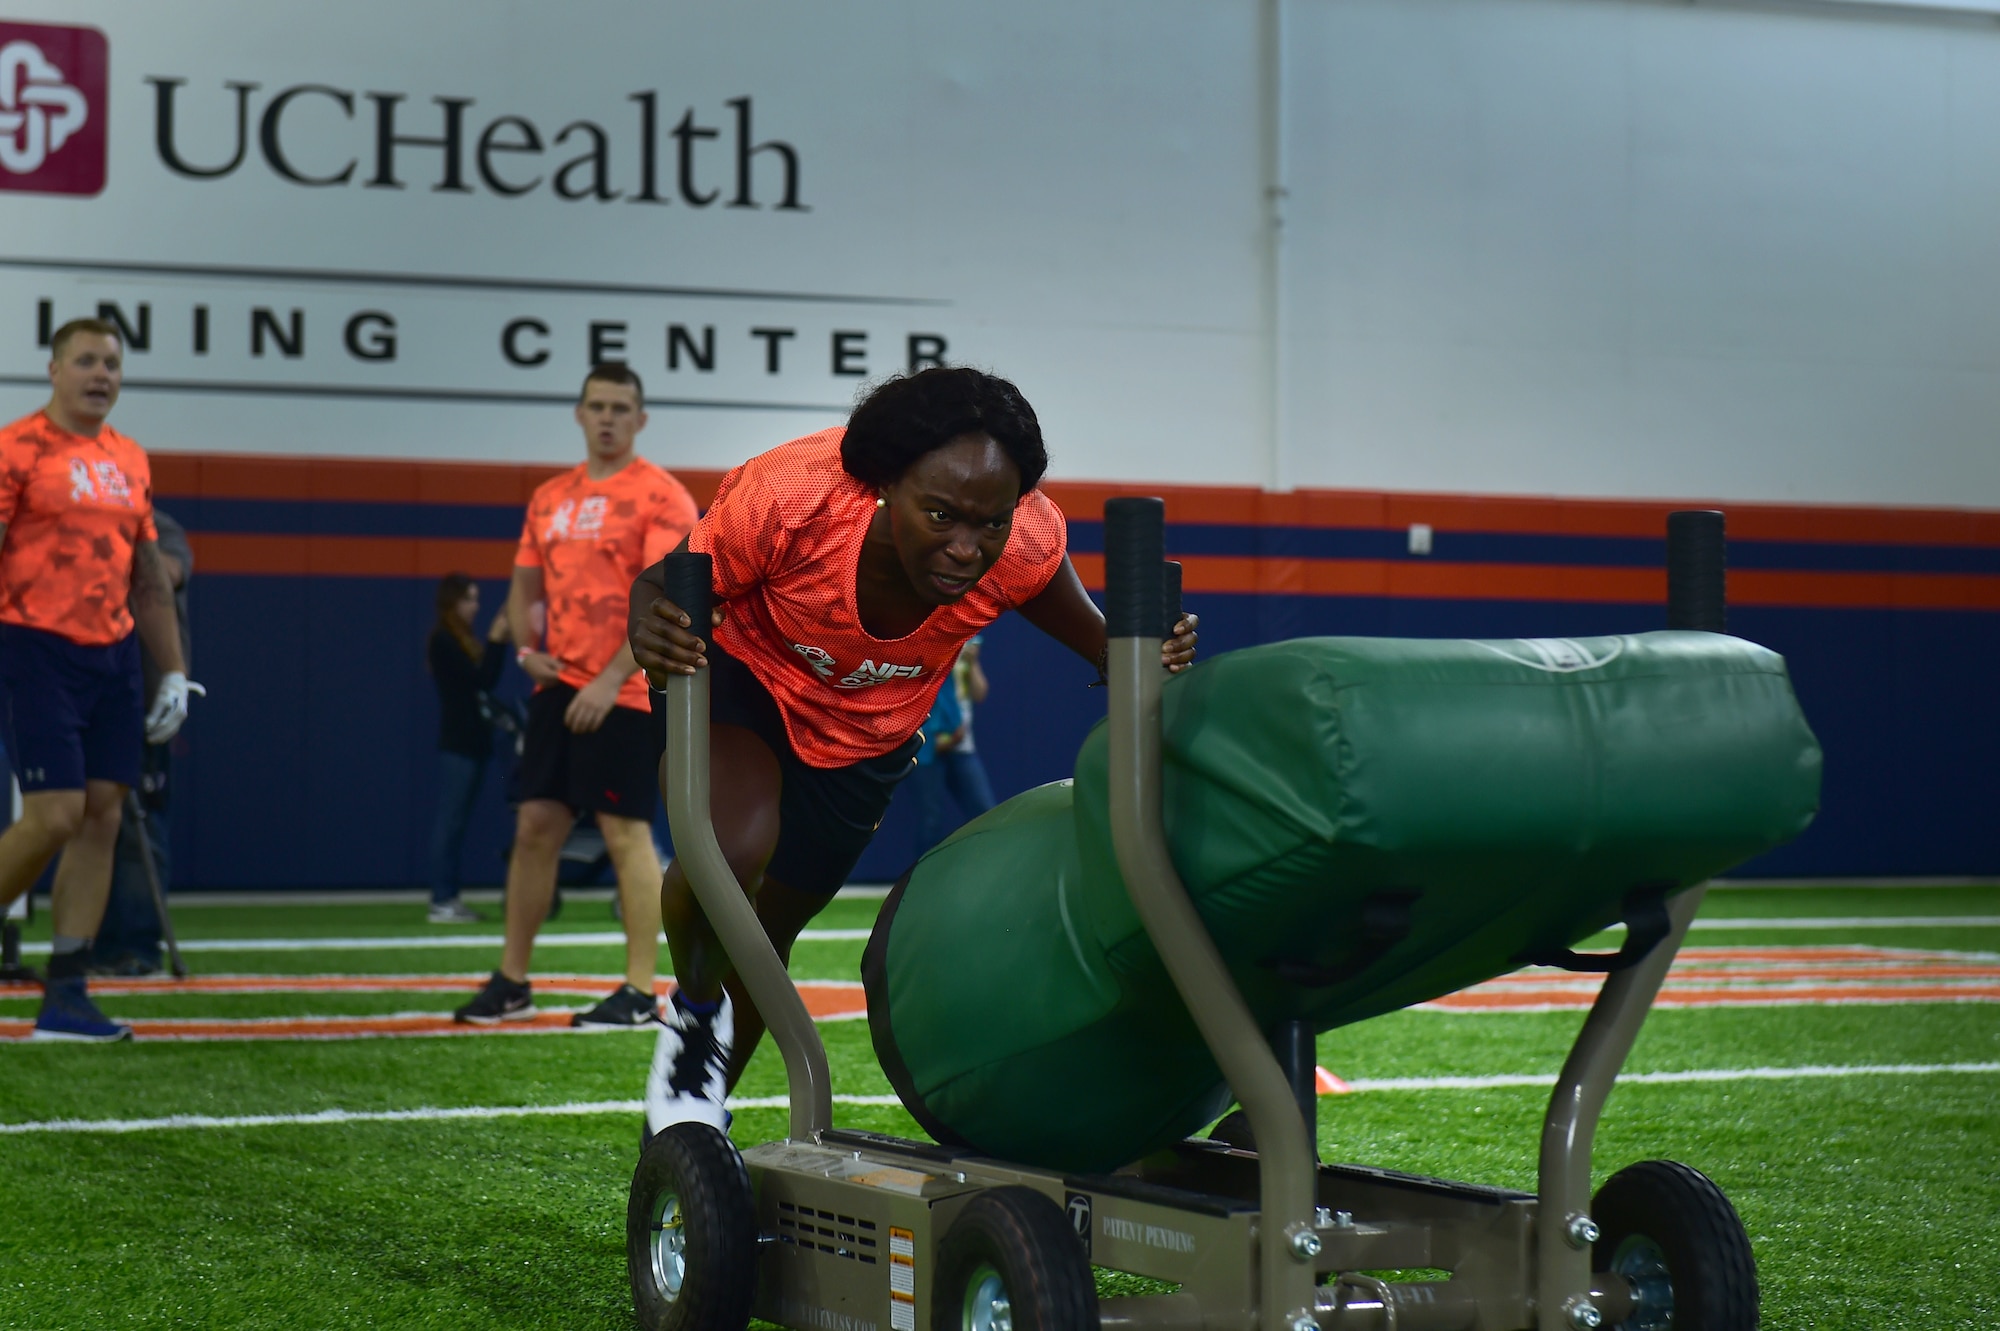 Staff Sgt. Jocquise Wolfe, 460th Space Wing command post operator, participates in a sled push portion of a military training camp at the Denver Broncos’ University of Colorado Health Training Center Fieldhouse in Englewood, Colo., August 25, 2016. Team Buckley won the military camp competition after participating in five head-to-head challenges including: team ball catching, a gauntlet, tackling dummy relay, sled push and the kneeling power ball launch. (U.S. Air Force photo by Airman 1st Class Gabrielle Spradling/Released)